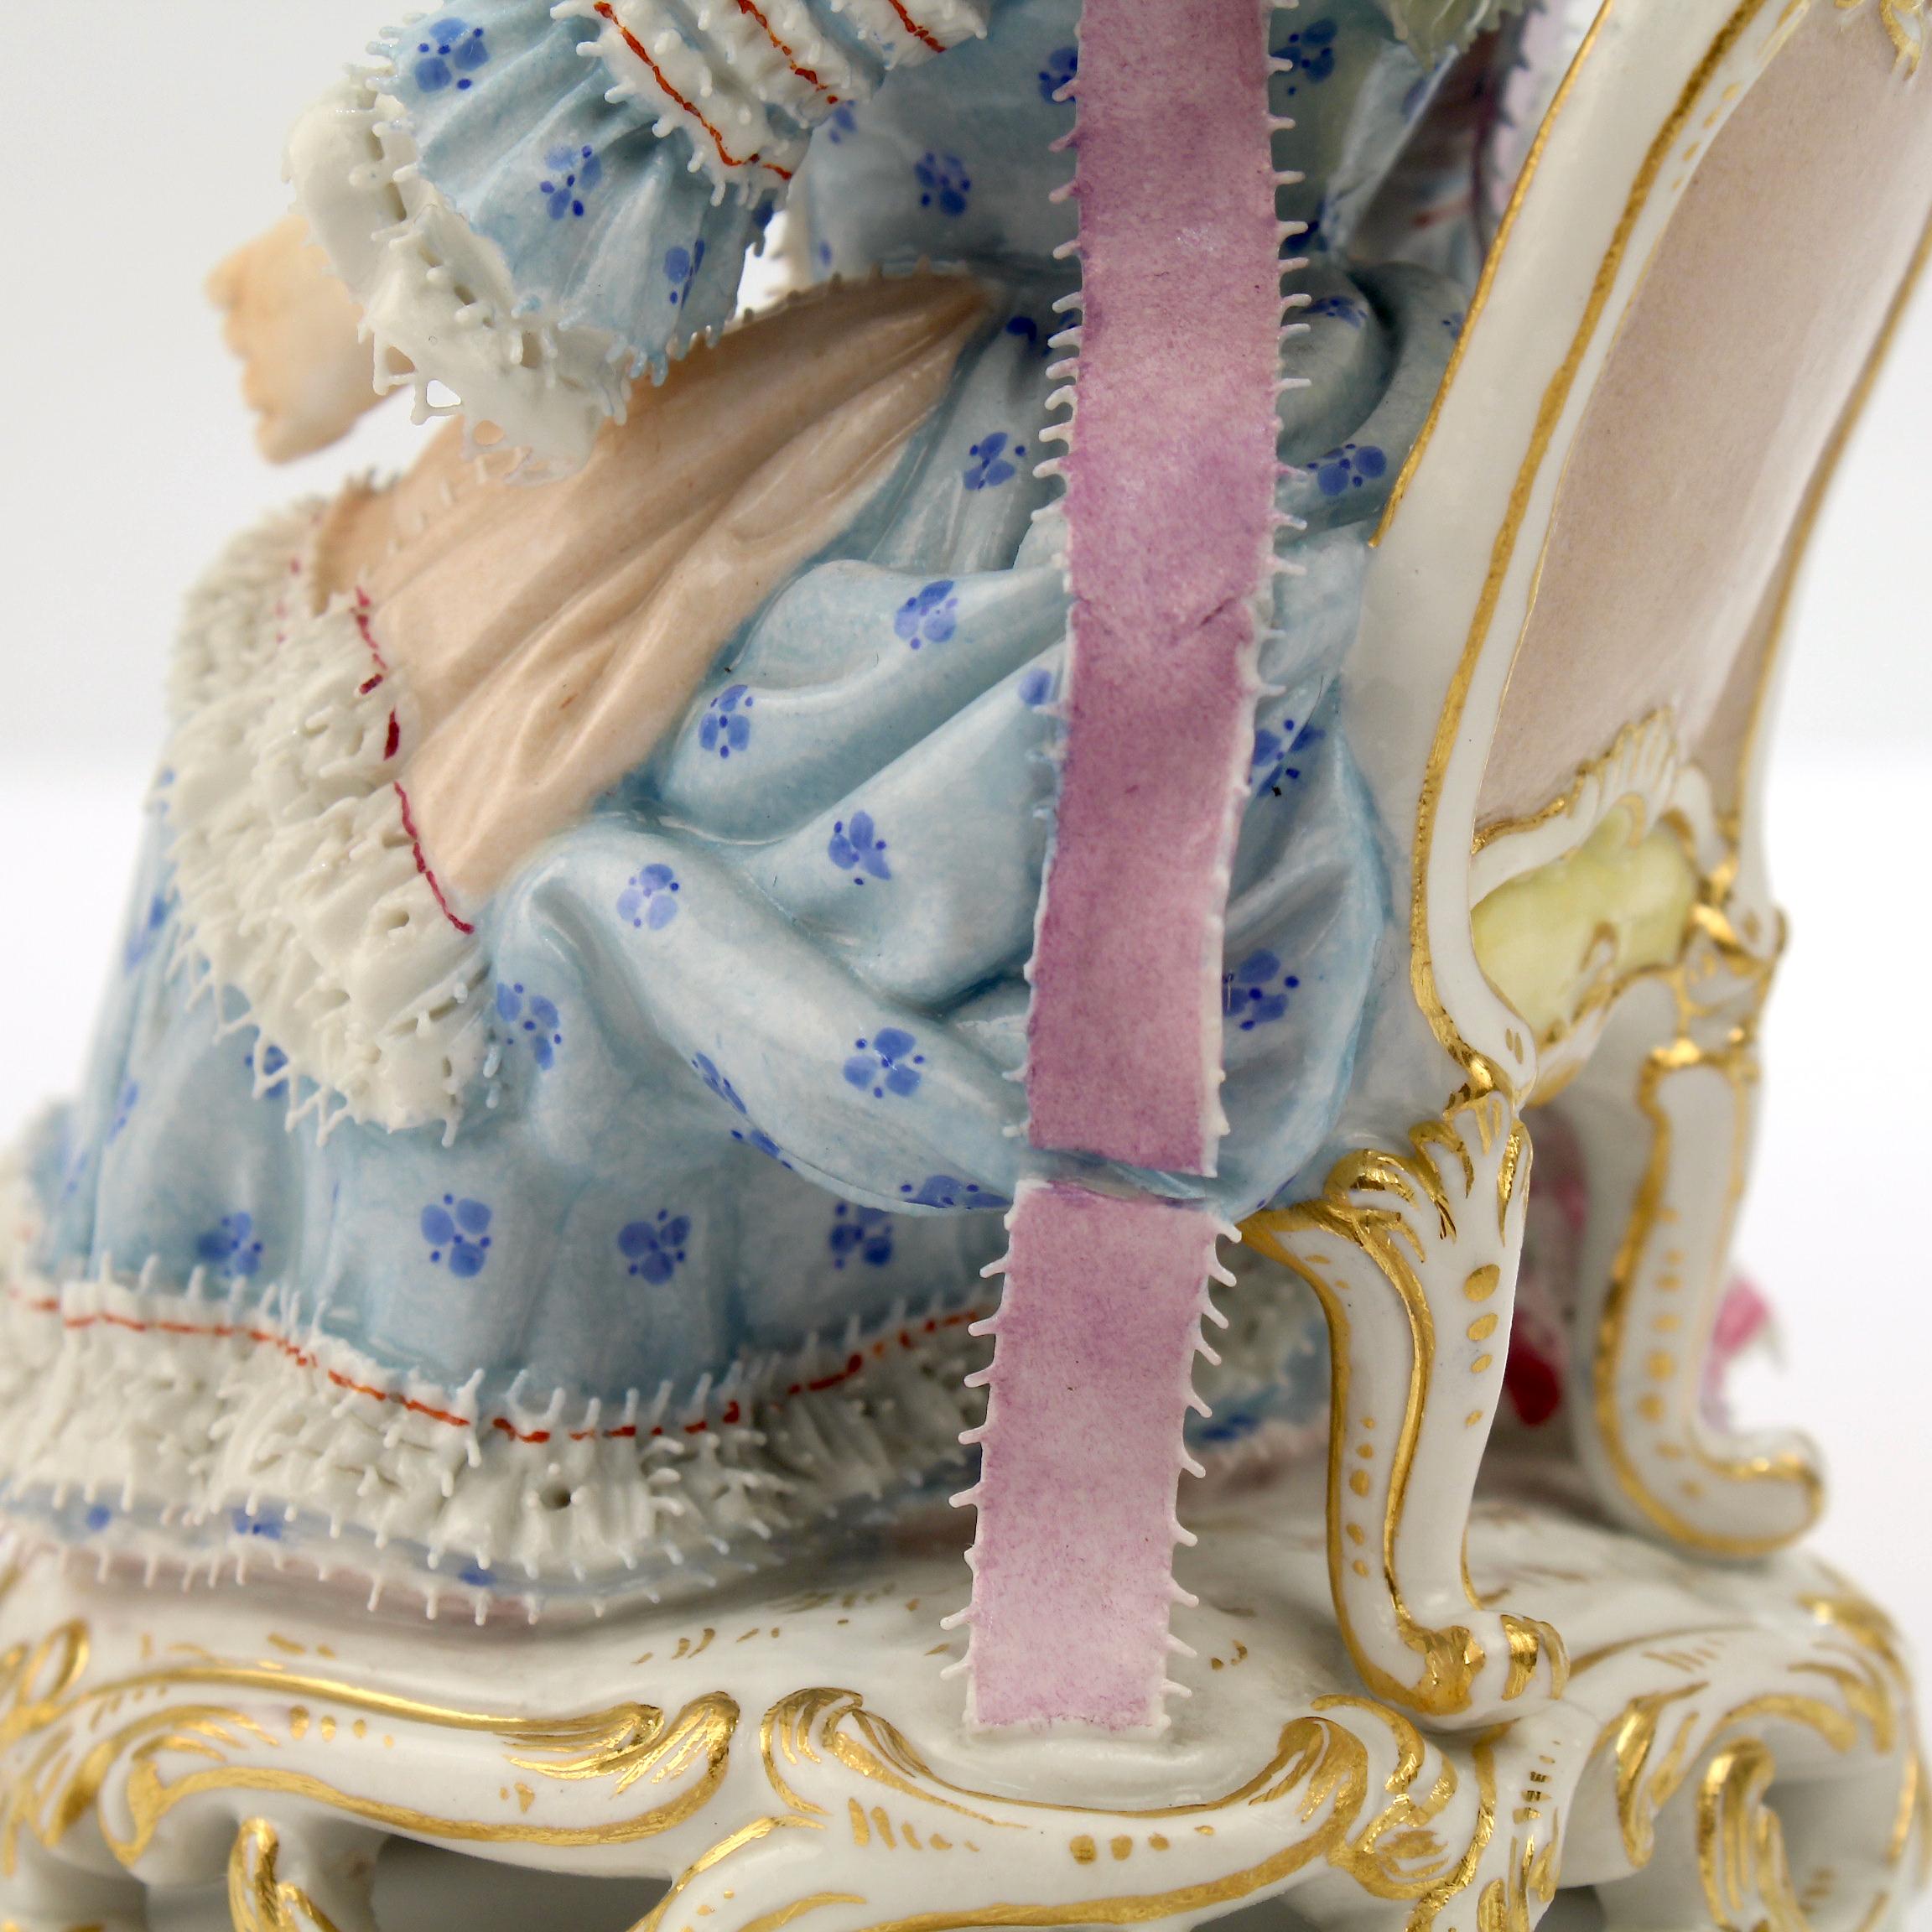 Antique Meissen Porcelain Figurine of a Girl with a Thread Winder Model No. C 28 3